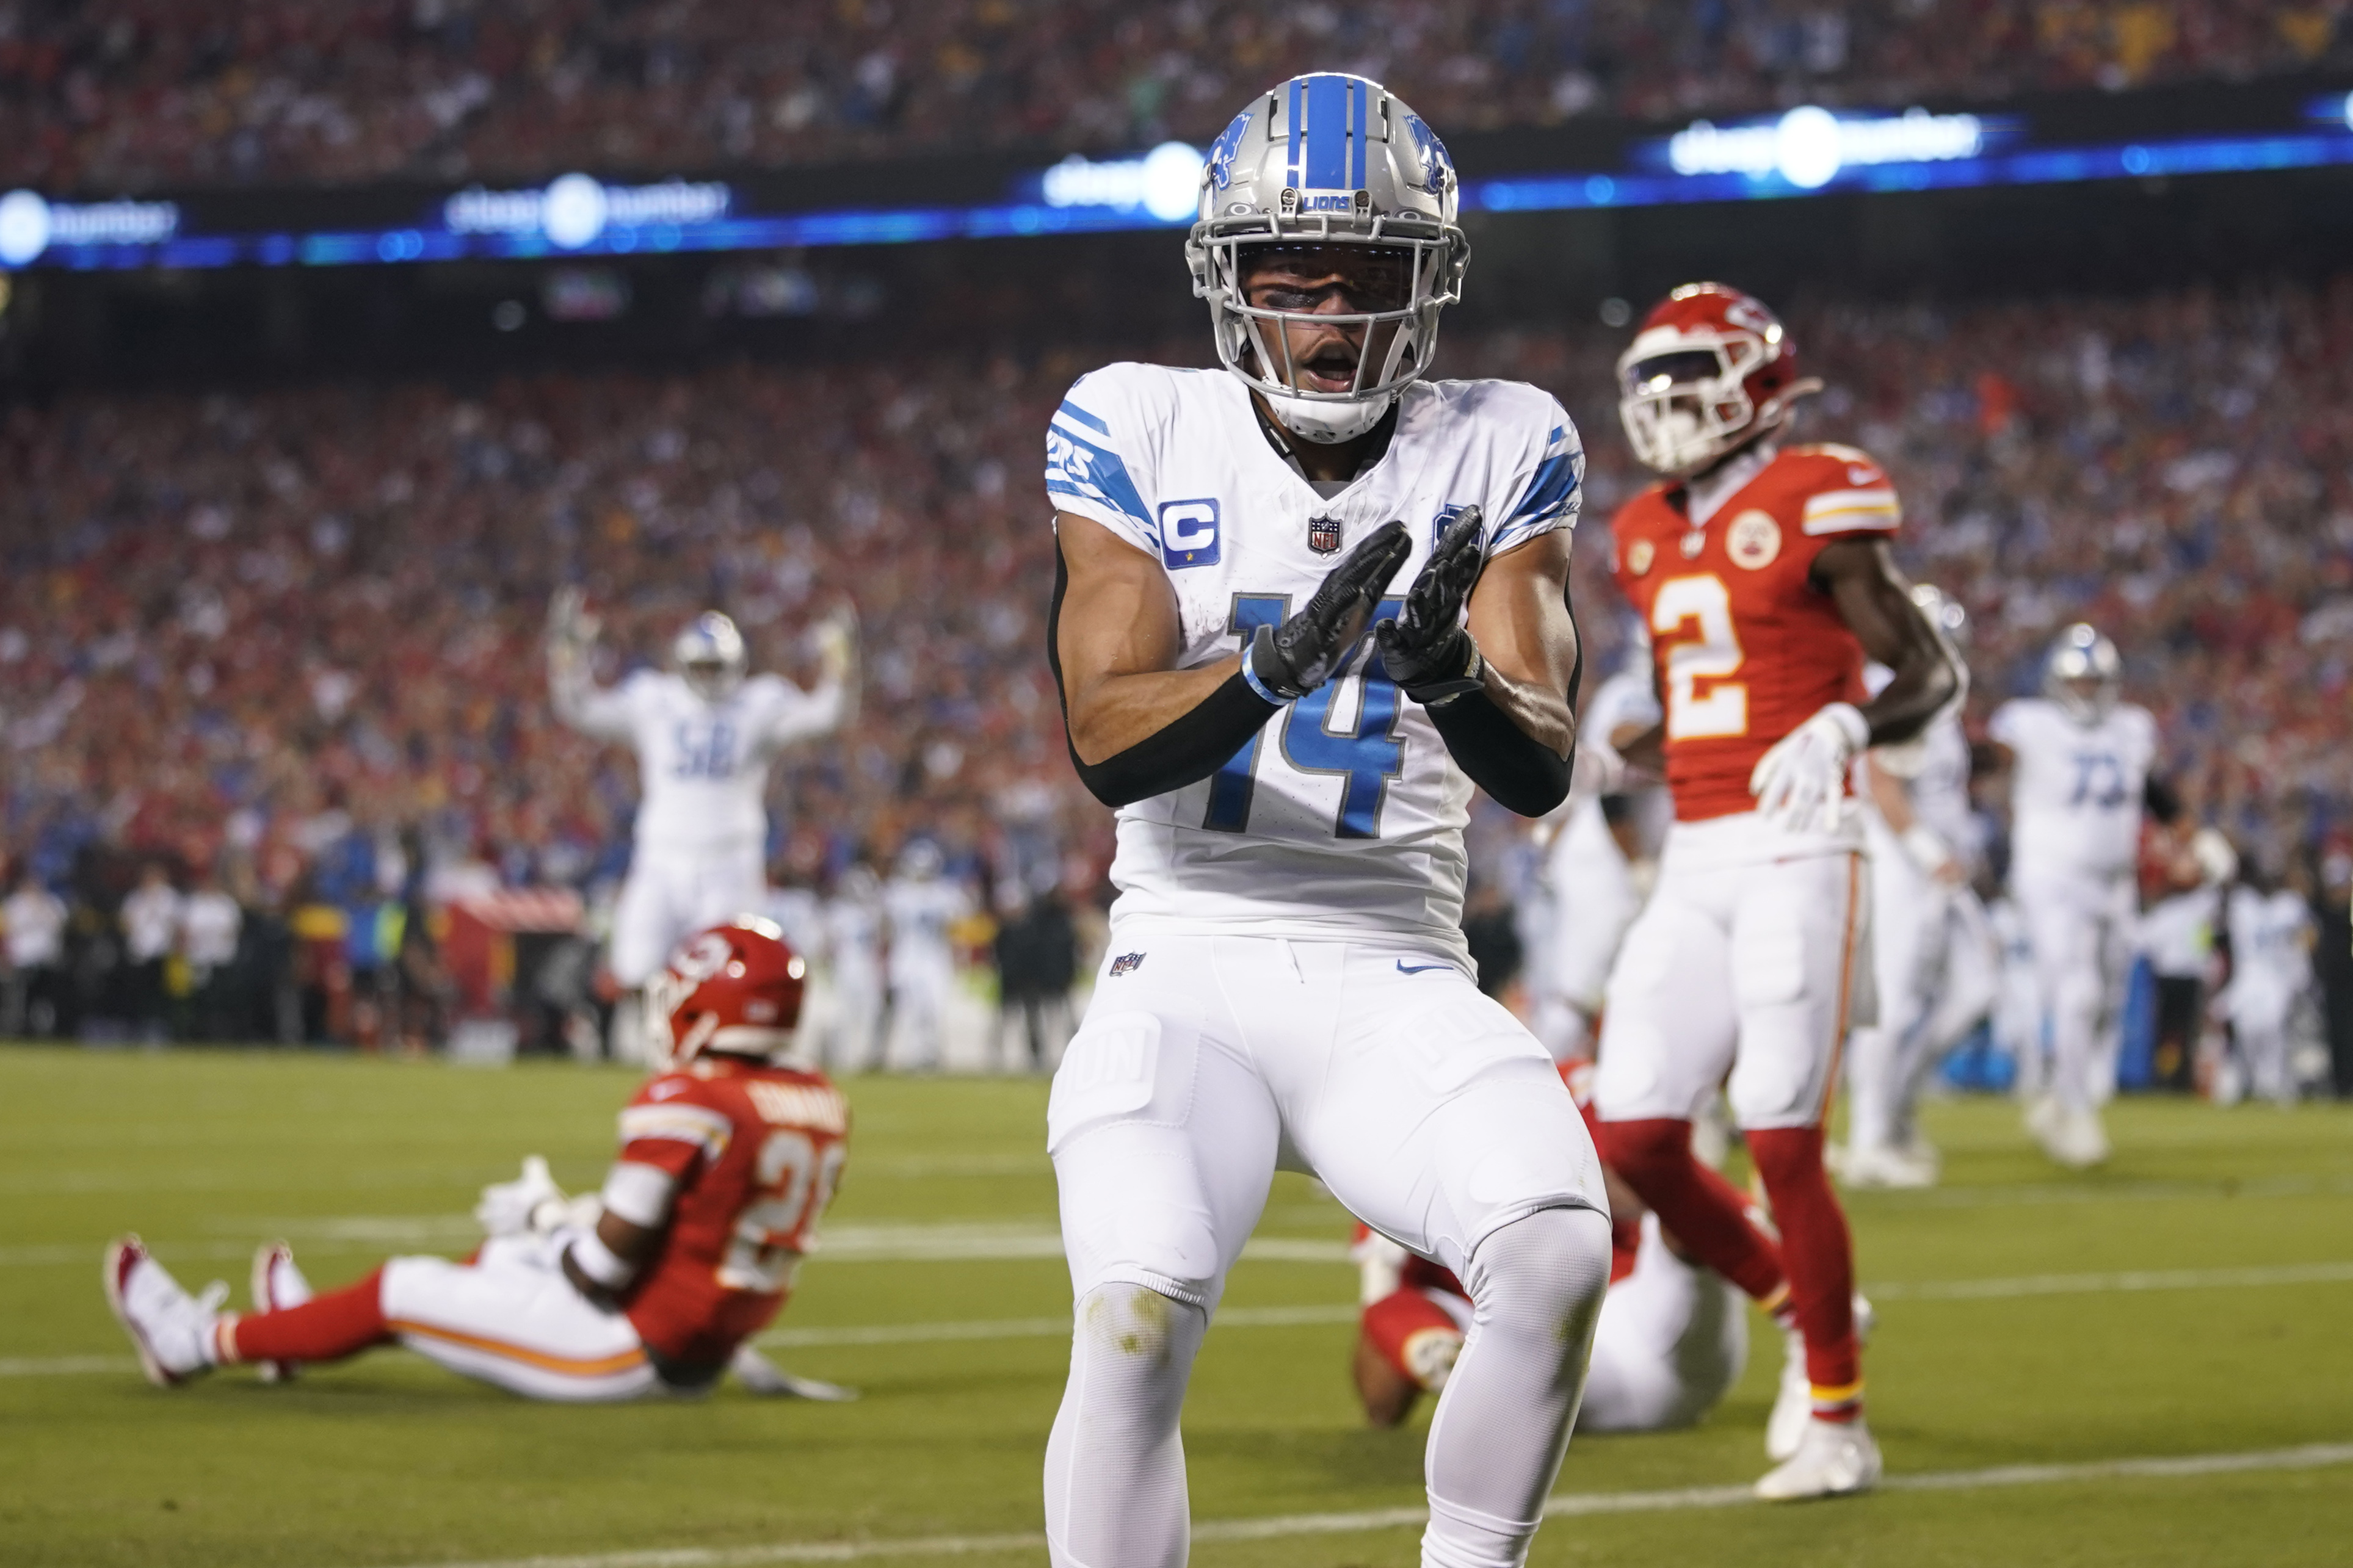 Bet Lions-Seahawks at FanDuel, save $100 on NFL Sunday Ticket